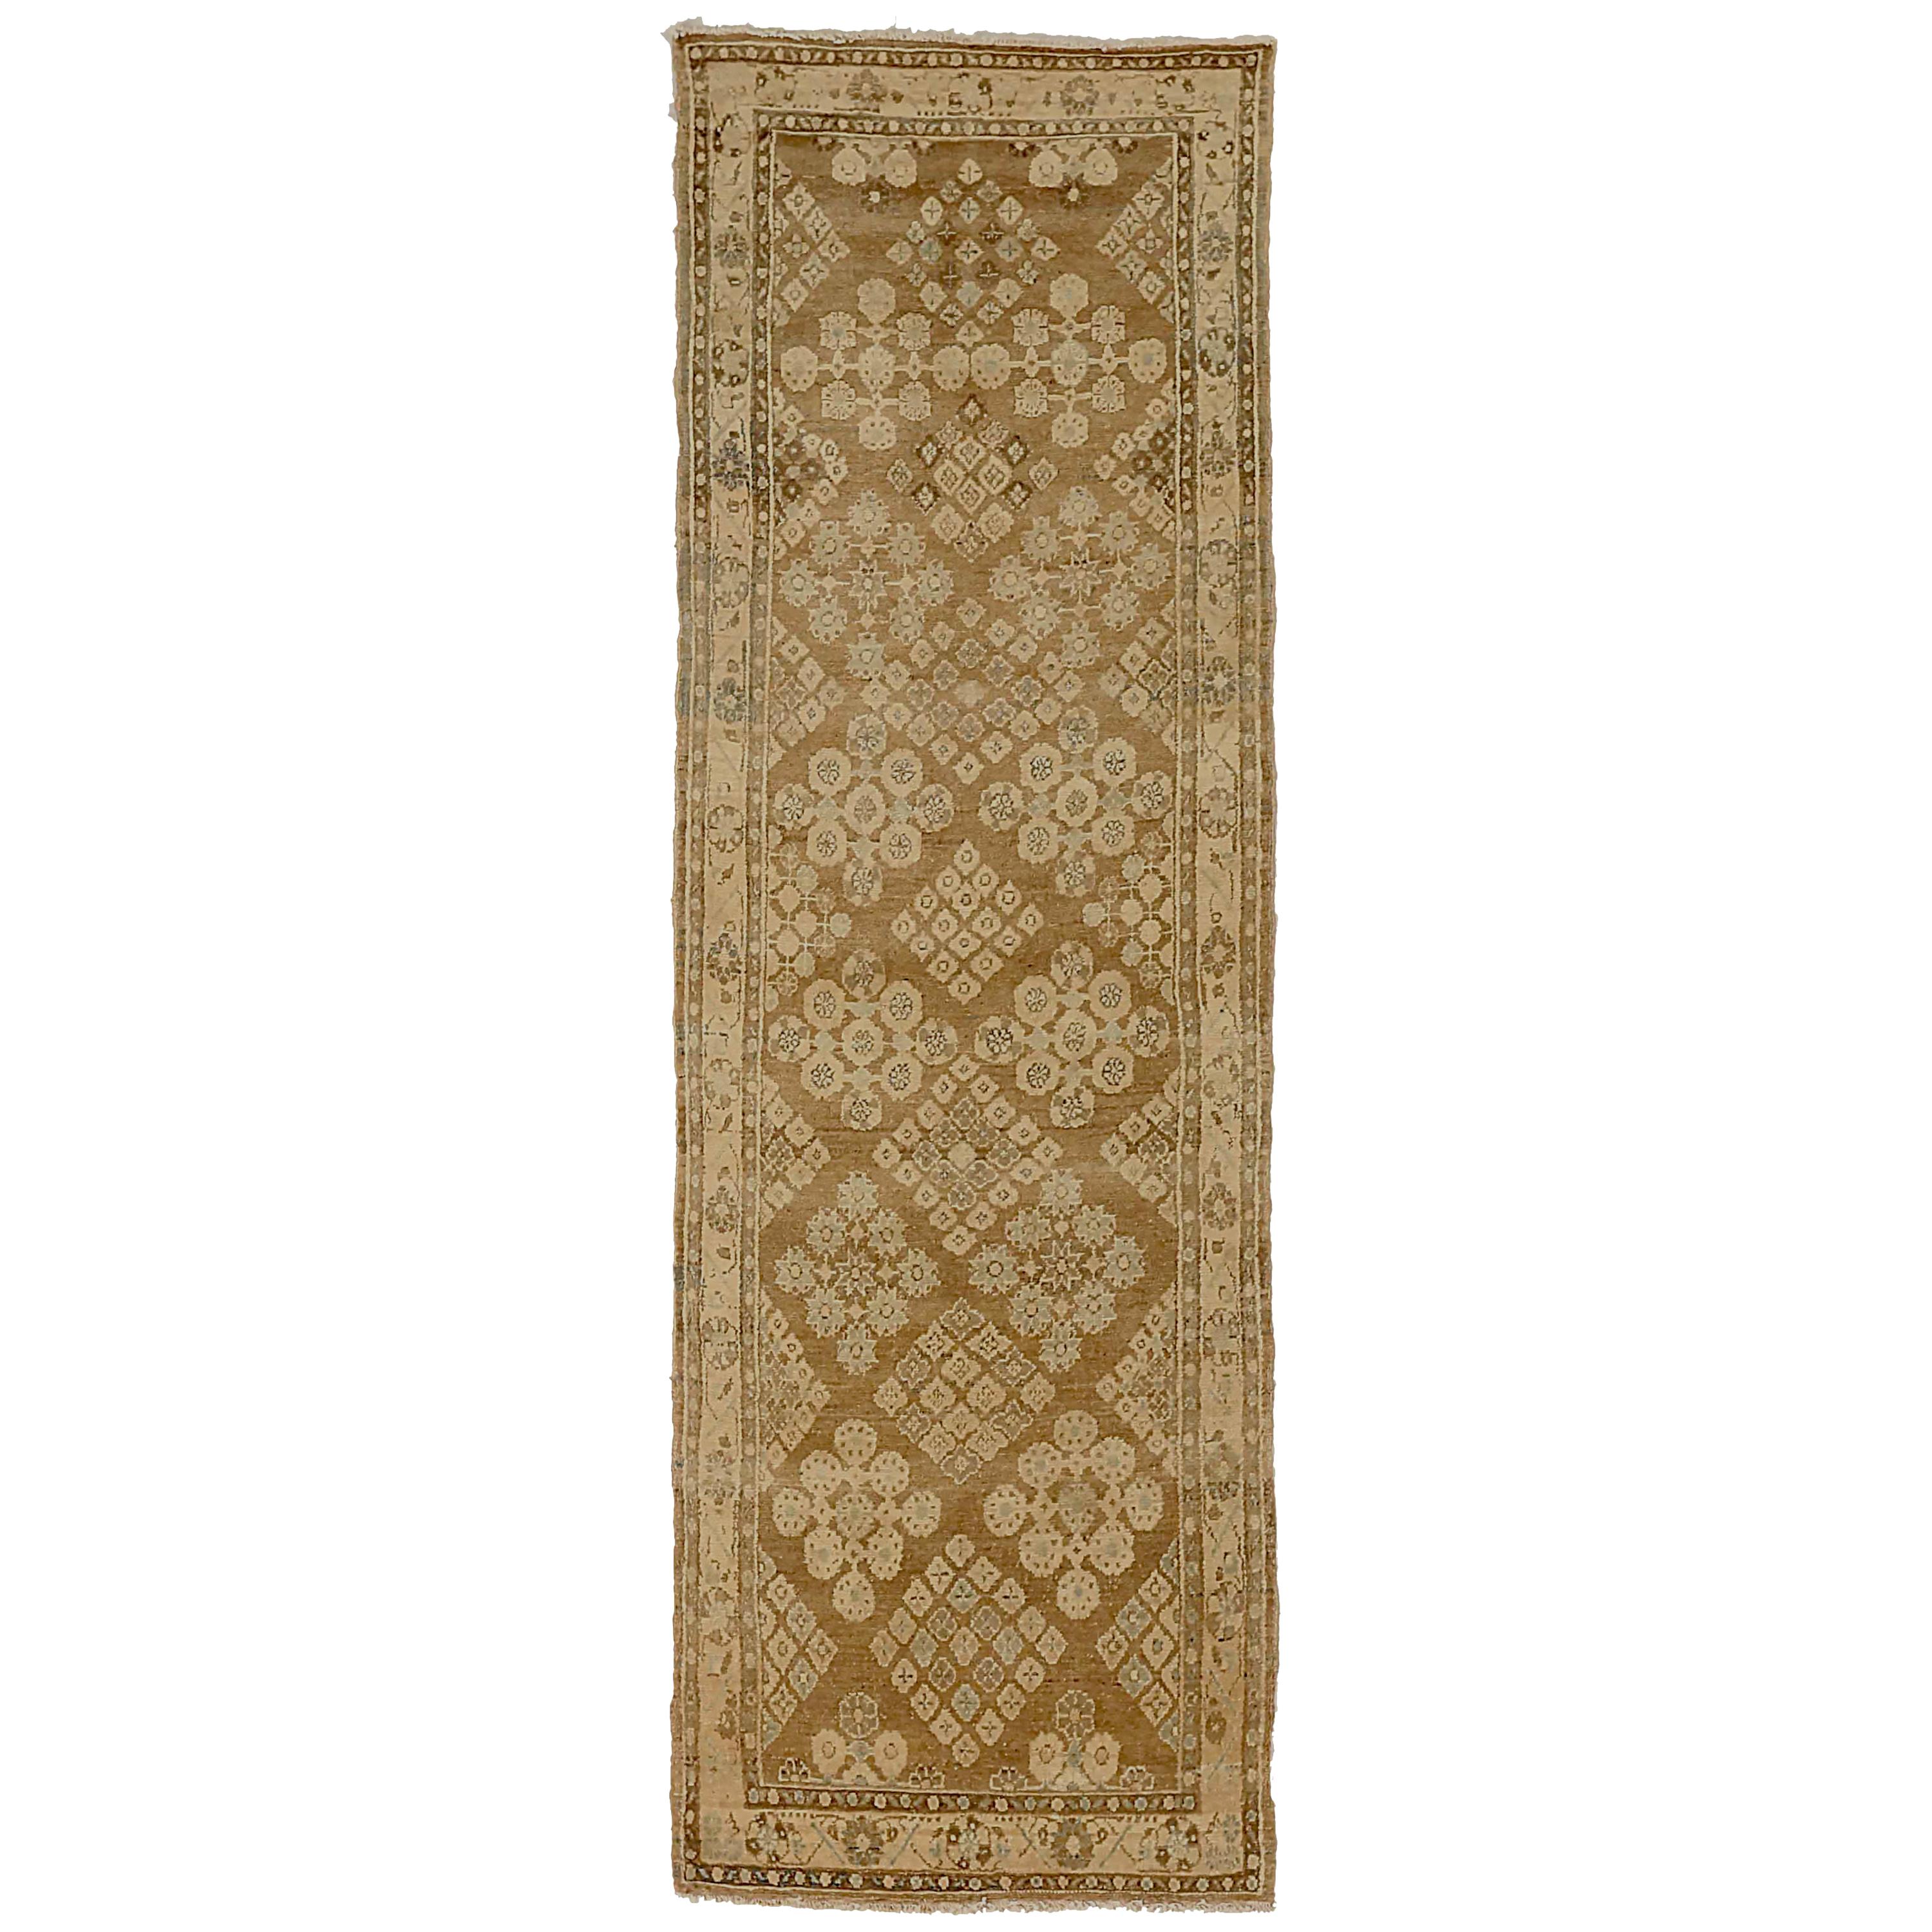 Antique Persian Malayer Runner Rug with Floral Details on Brown Field